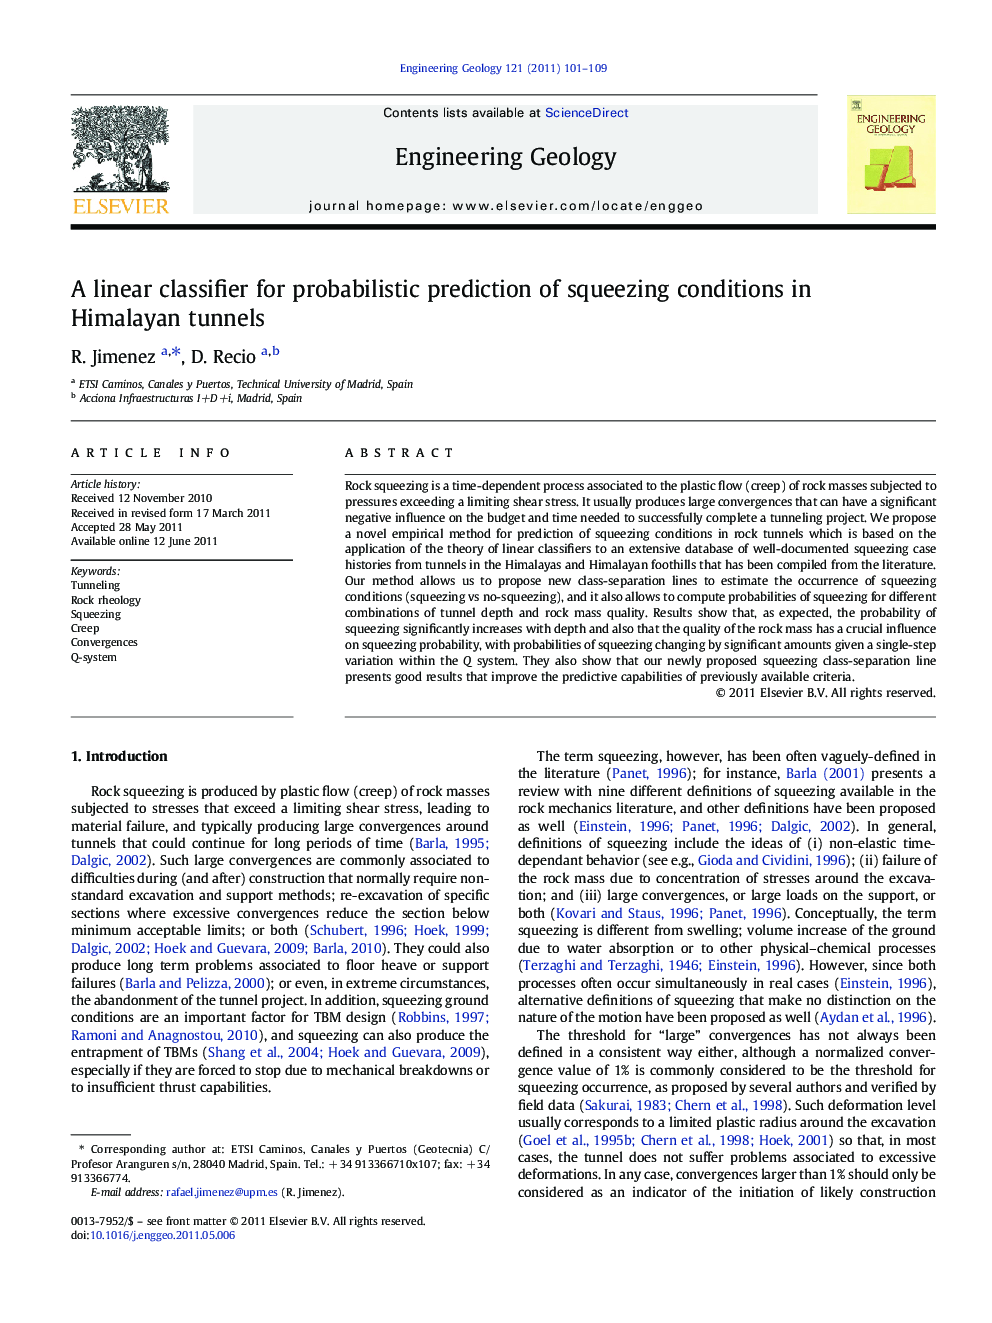 A linear classifier for probabilistic prediction of squeezing conditions in Himalayan tunnels